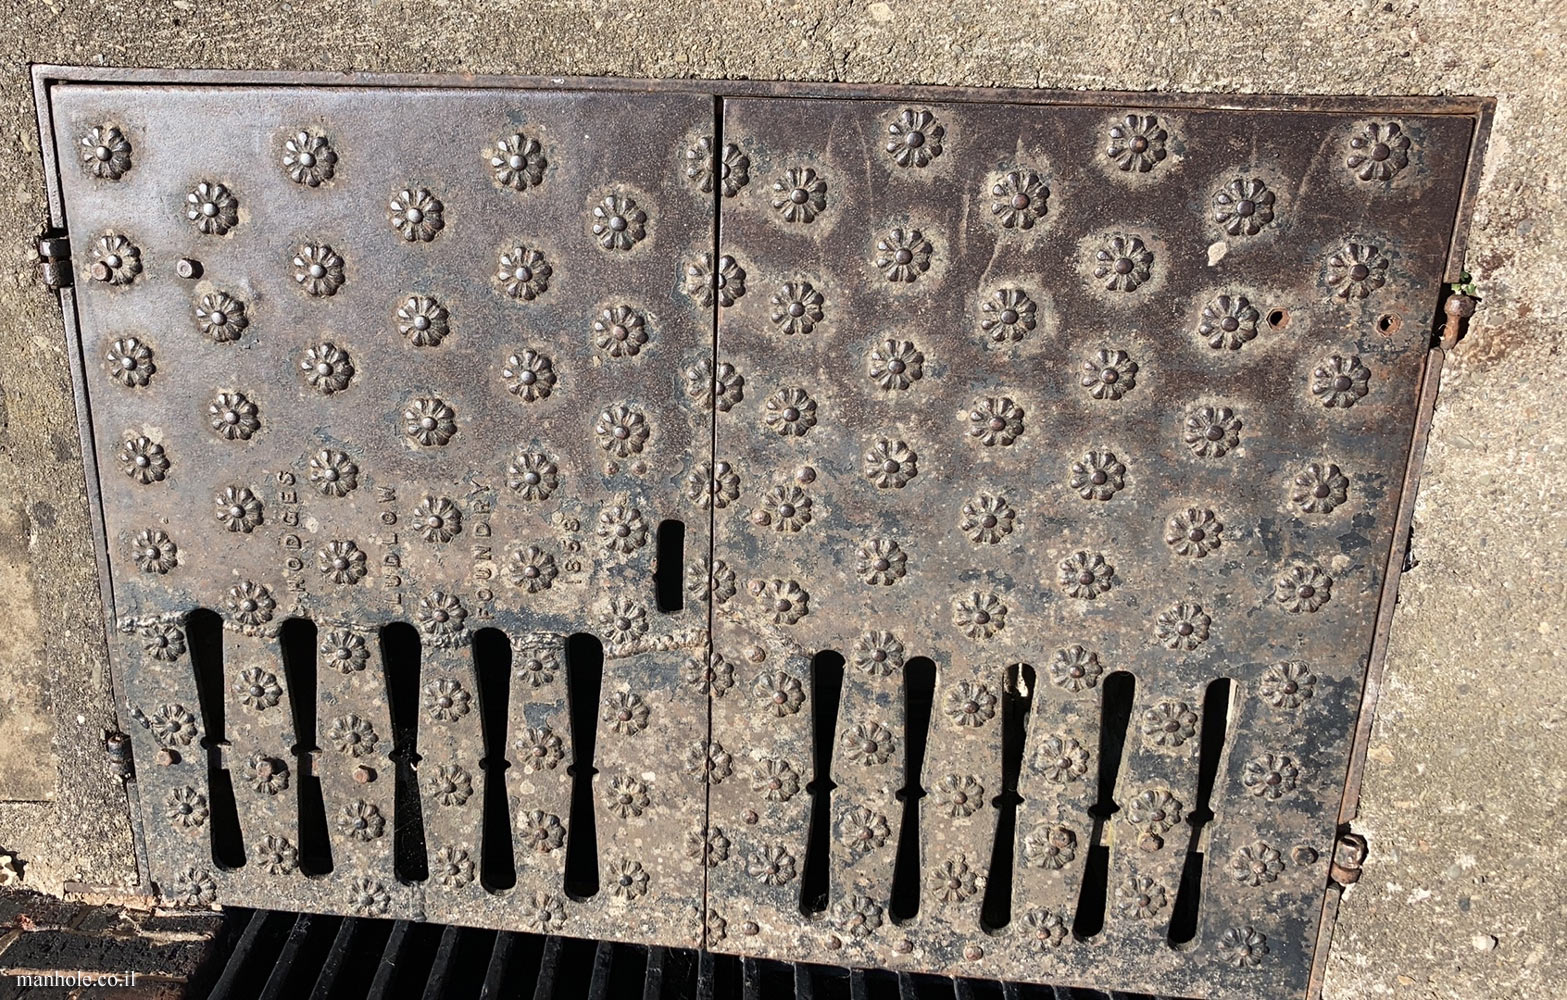 Ludlow - Drain cover with two opening doors and a background of flowers